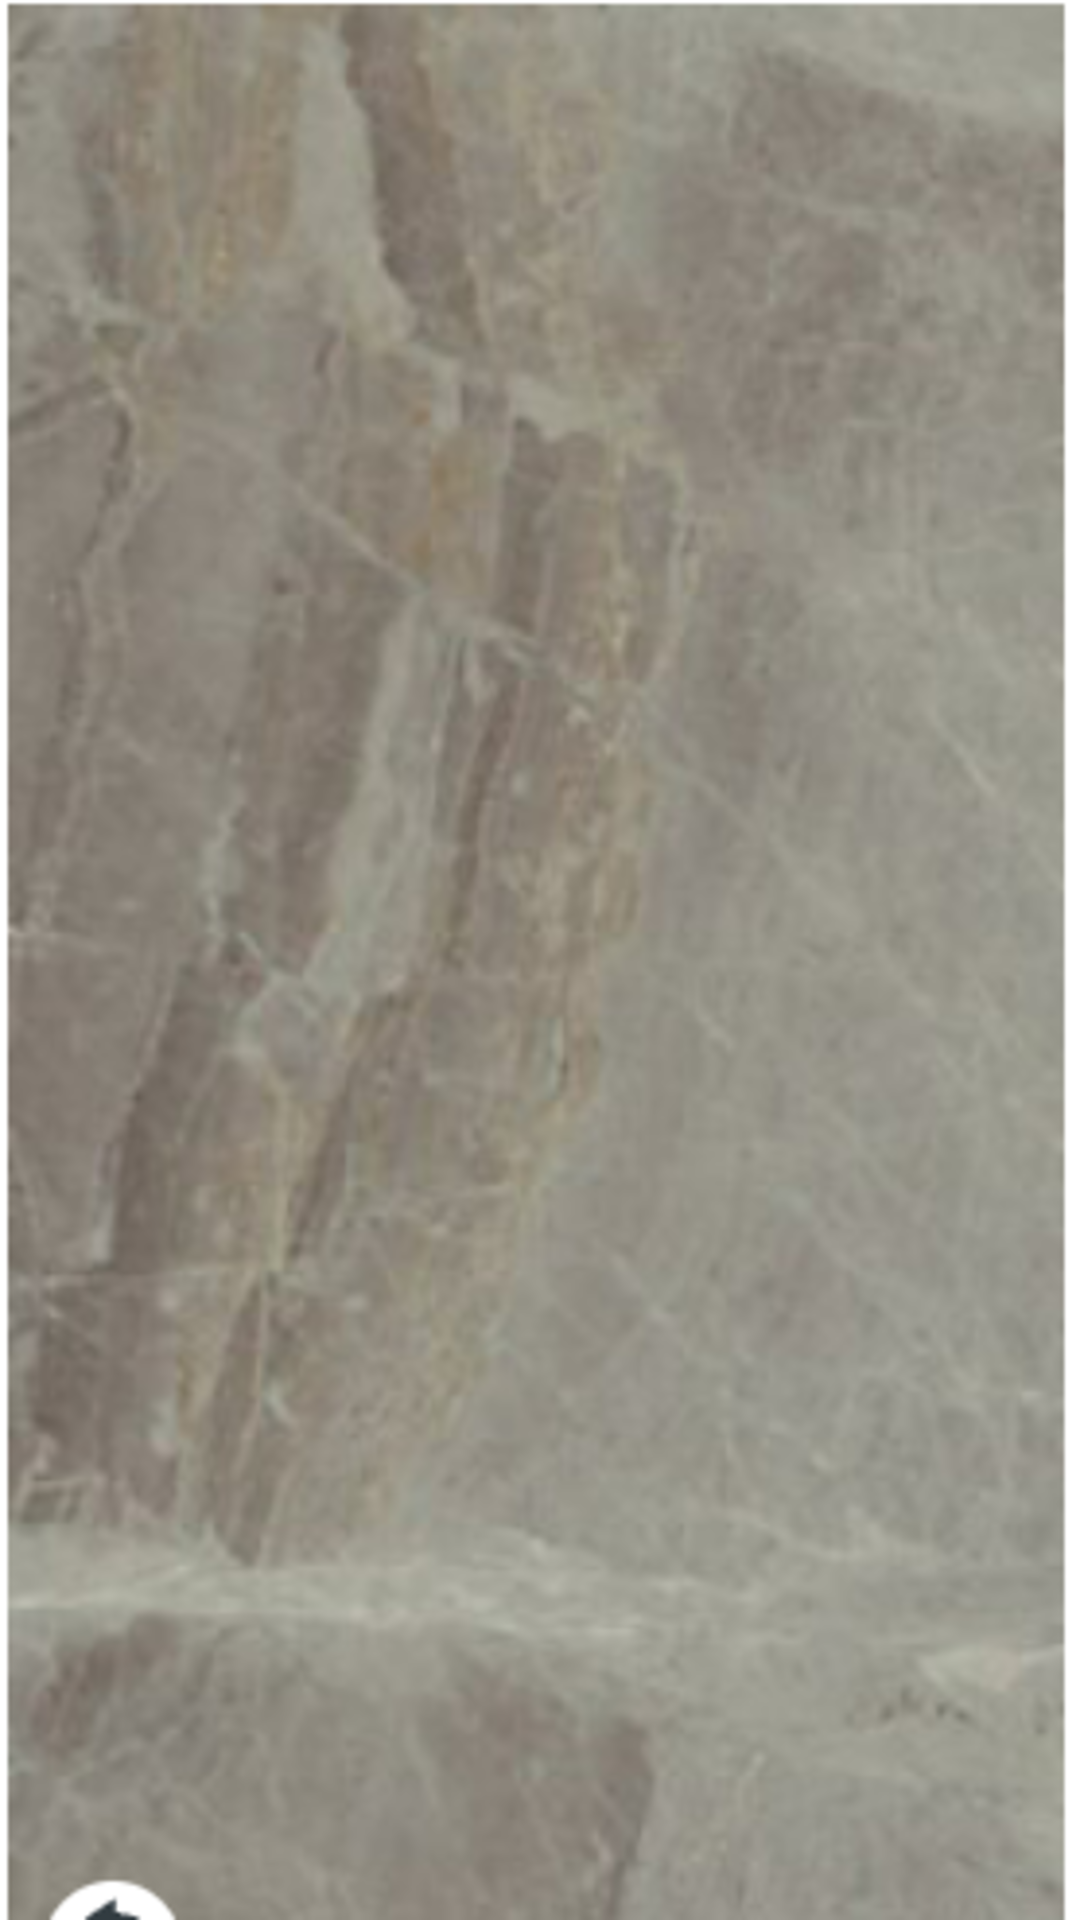 NEW PACKAGED 10.8m2 OF FLORENCE GREY GLOSS CERAMIC WALL TILES. 300x600MM. 9MM THICK. - Image 2 of 5